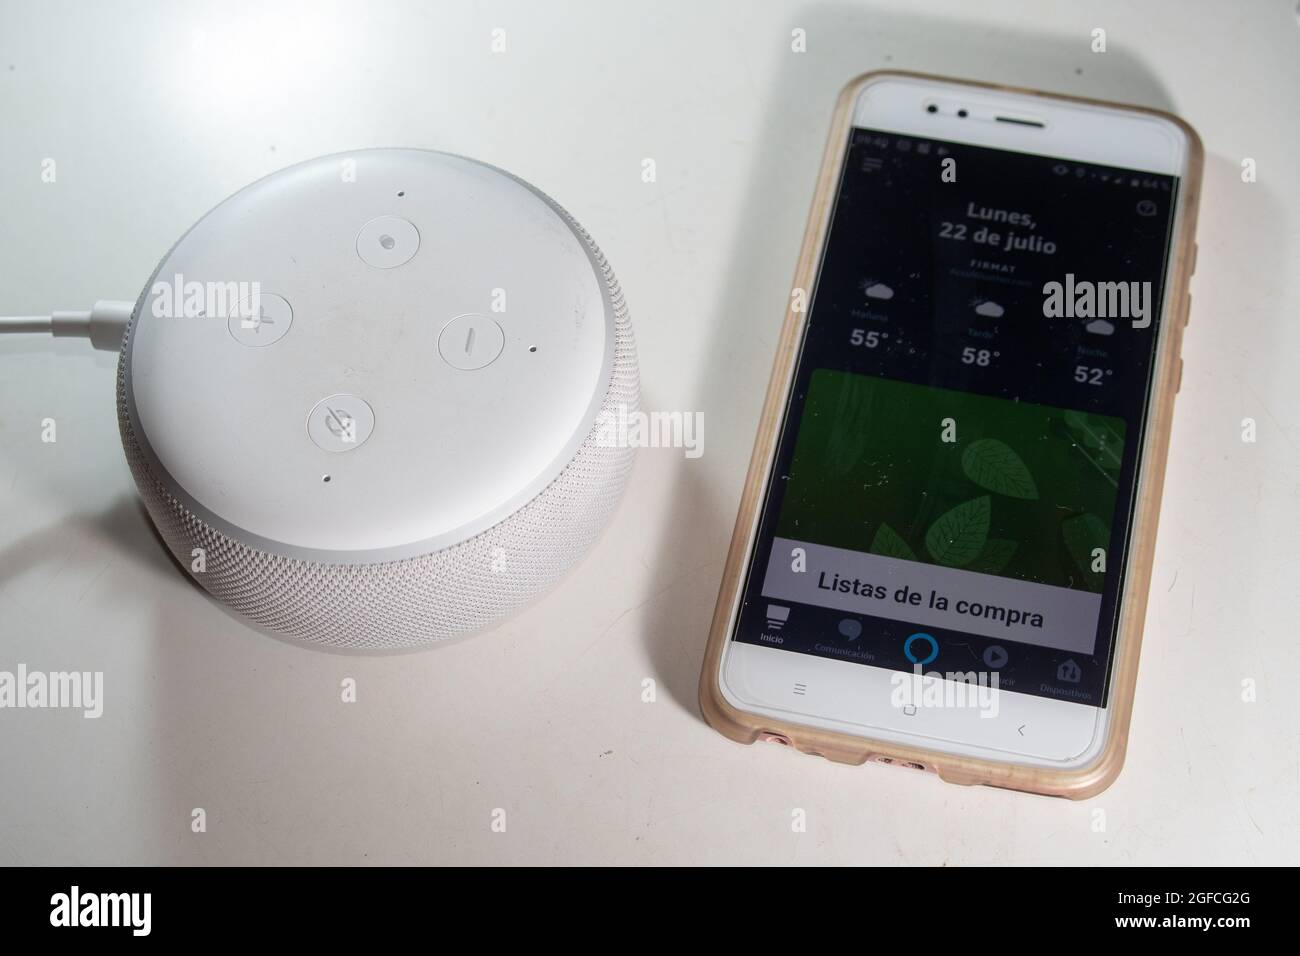 BUENOS AIRES, ARGENTINA - Jul 23, 2019: An Alexa Echo Dot and a mobile  phone with Alexa's shopping list on a table Stock Photo - Alamy